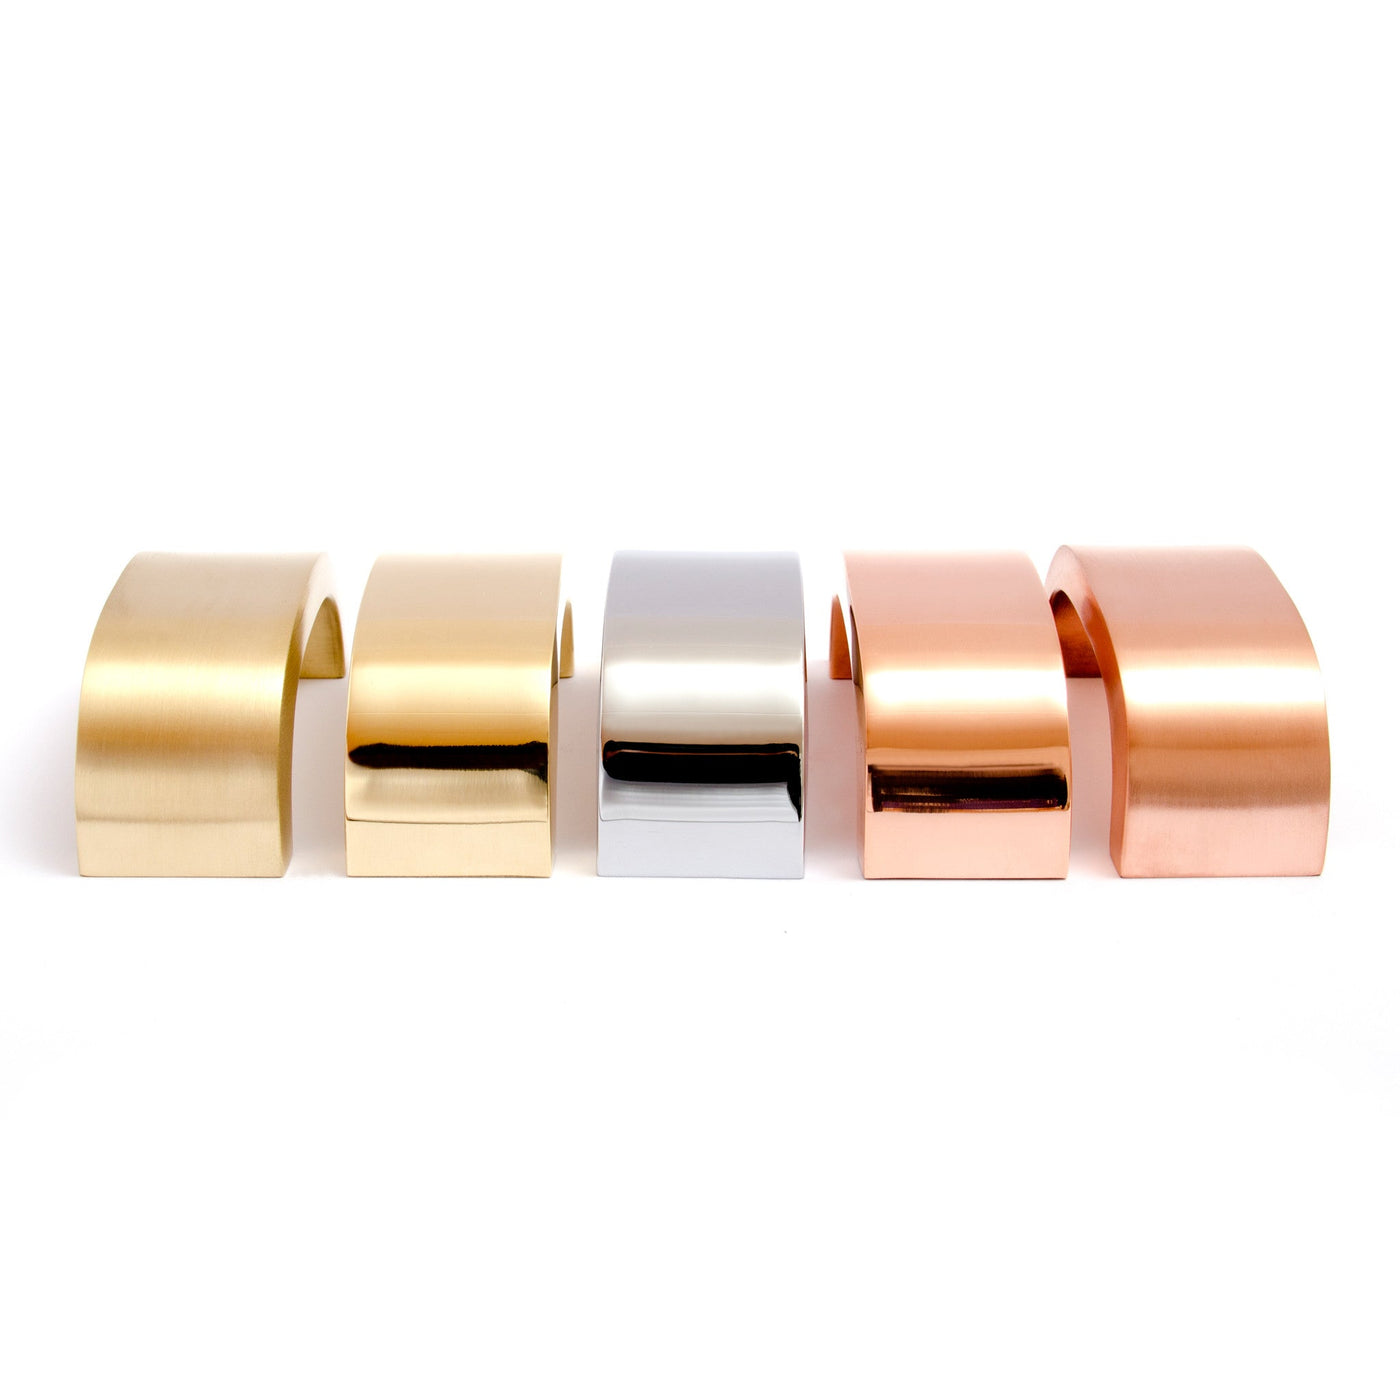 A row of Baccman Berglund Curve Handle rings in different colors on a white background.